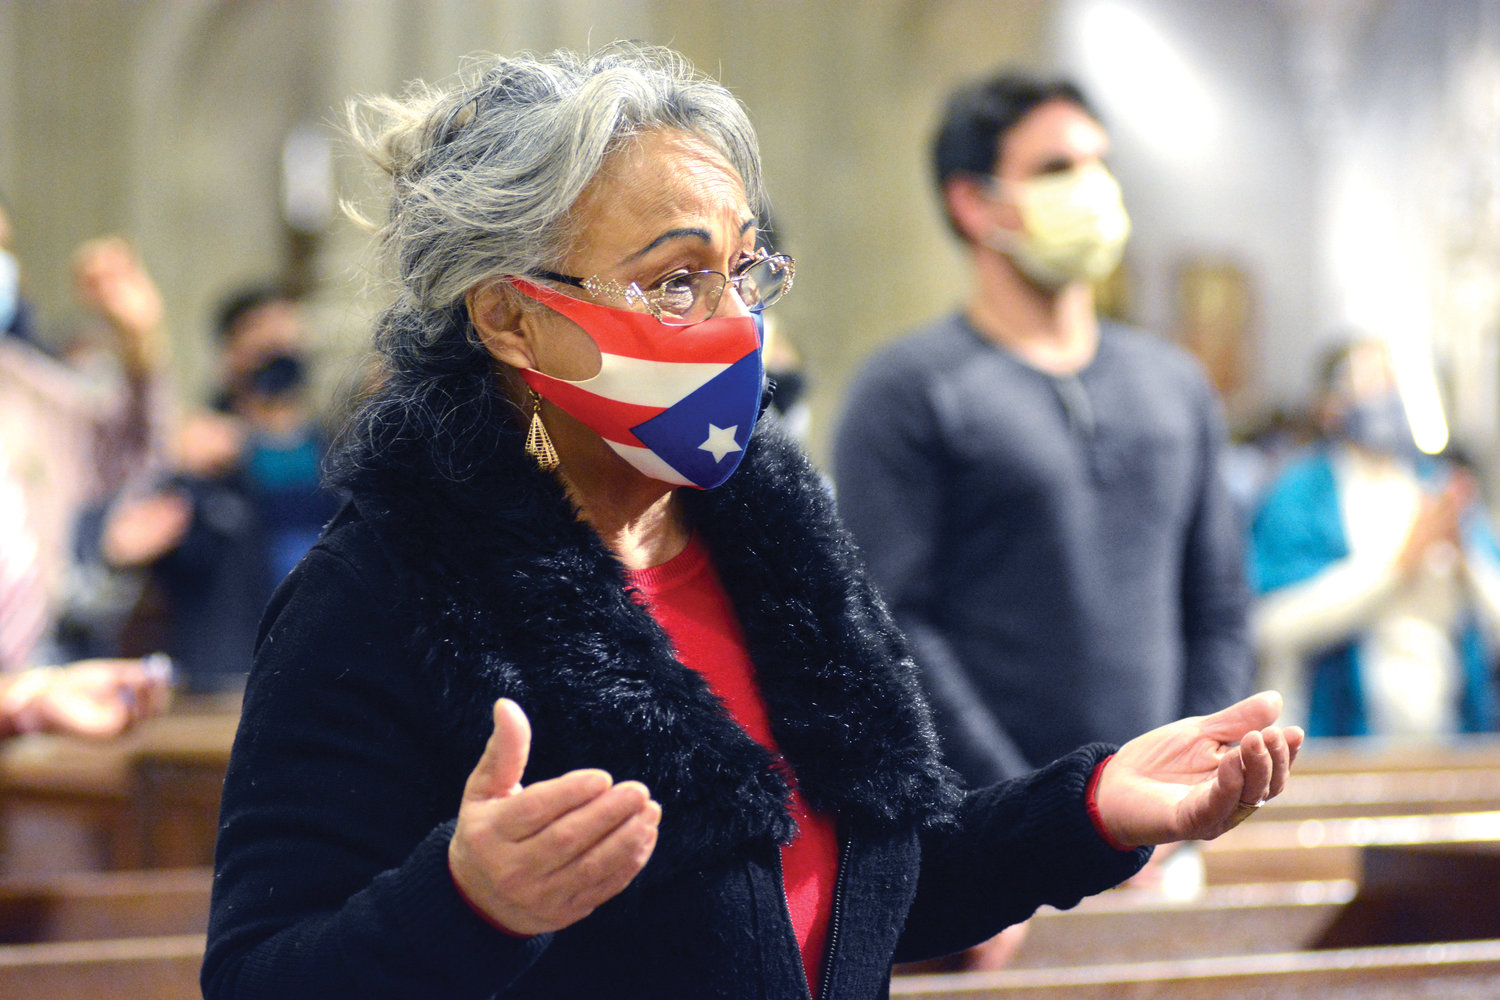 HER PRIDE SHOWS—A woman among the faithful wears a Puerto Rican flag face mask during the 40th annual Our Lady of Providence Mass at St. Patrick’s Cathedral. Auxiliary Bishop Edmund Whalen served as principal celebrant and homilist of the Nov. 15 Spanish-language Mass, which was livestreamed via the cathedral website. Our Lady of Providence is the patroness of Puerto Rico.